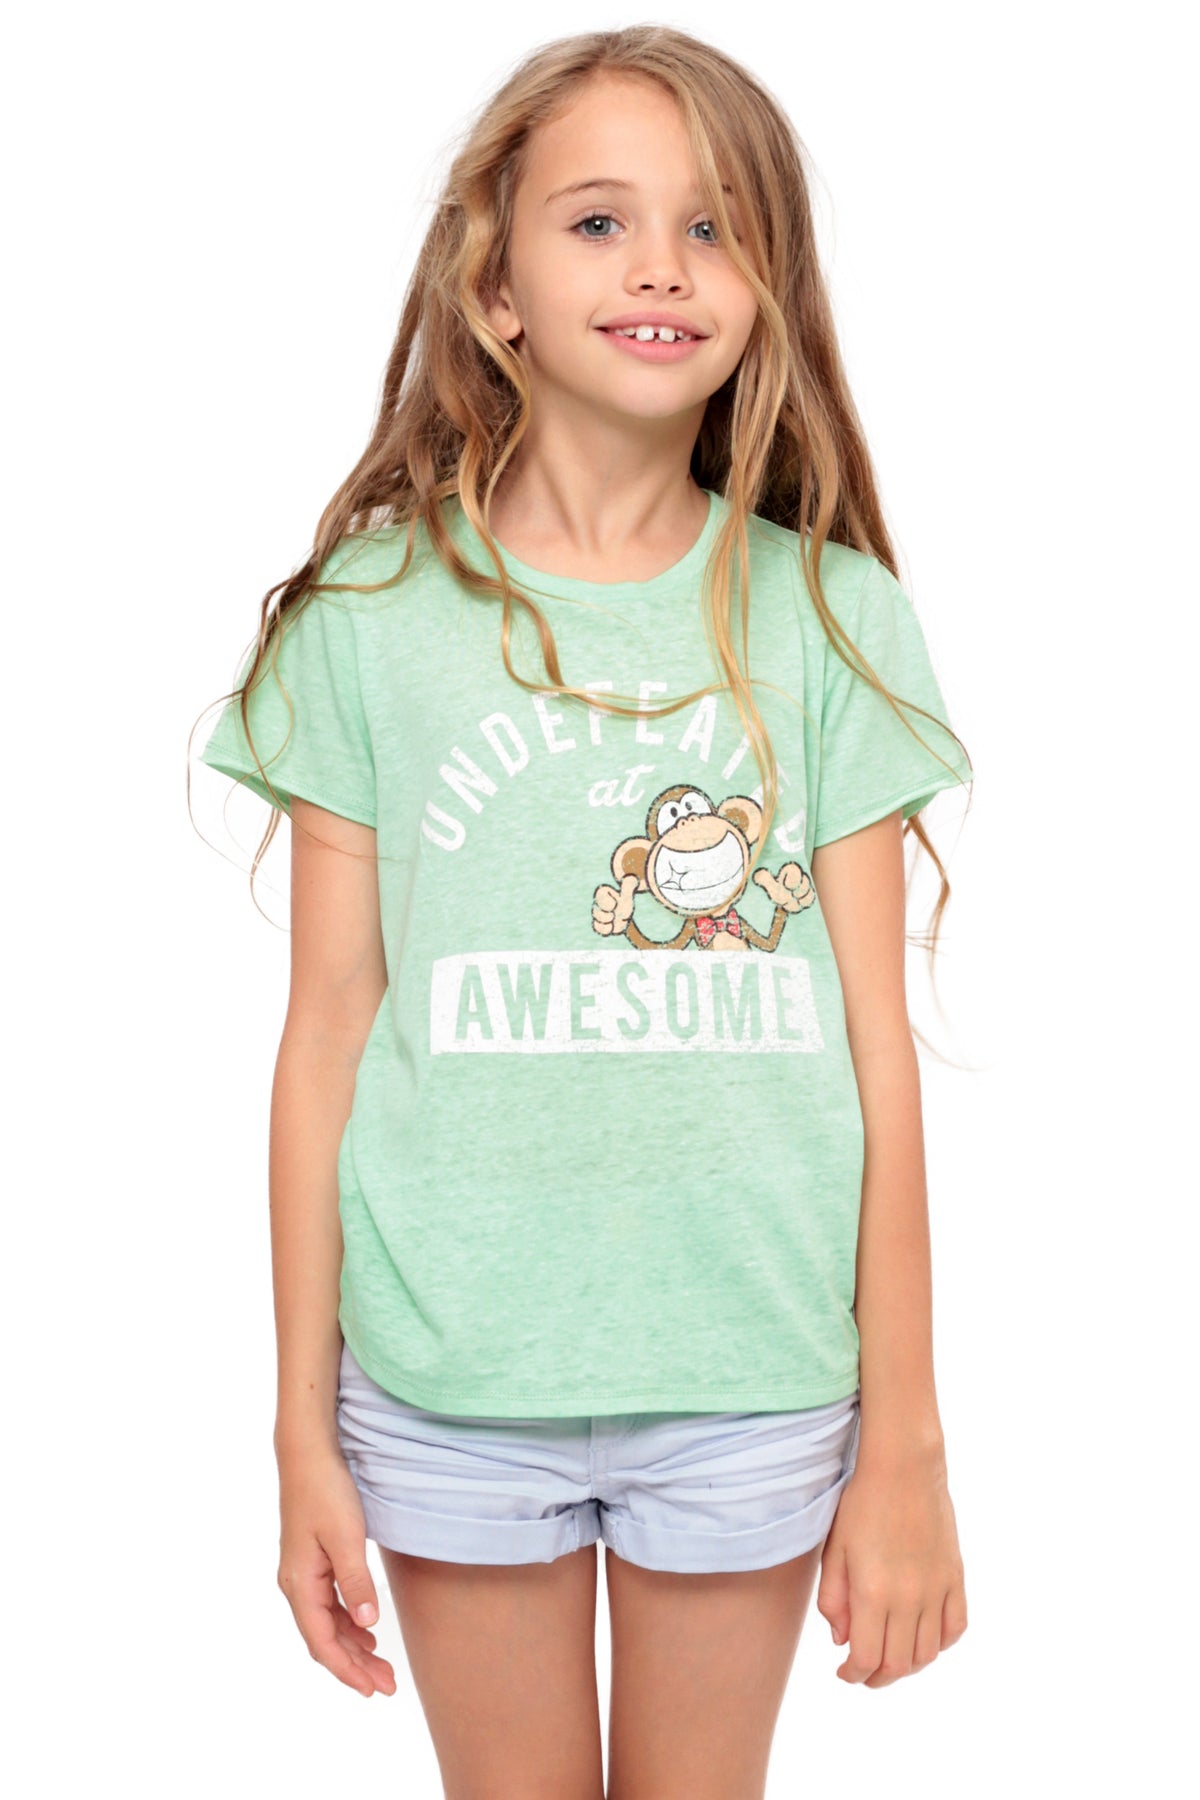 Bobby Jack Undefeated At Awesome | Girls Crop Top - Mint – Bobby Jack Brand